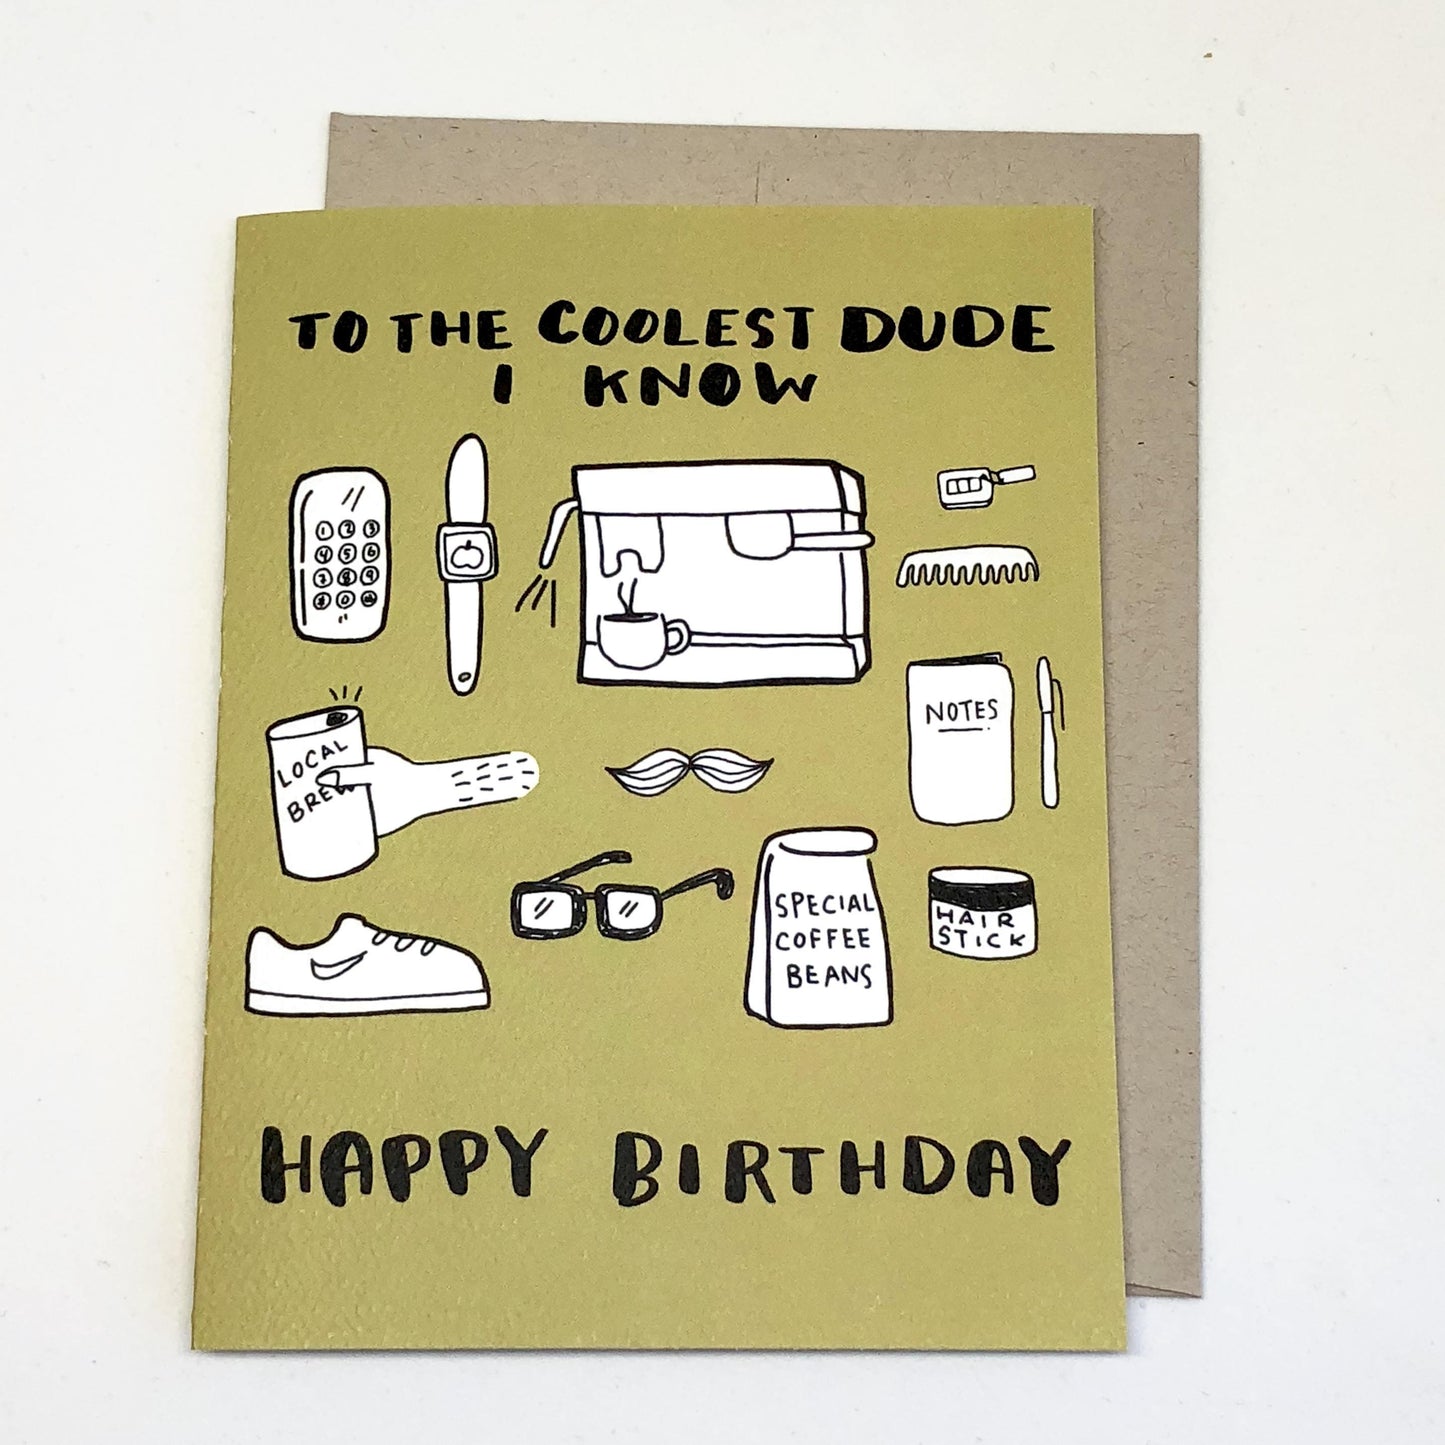 To The Coolest Dude I Know Birthday Card